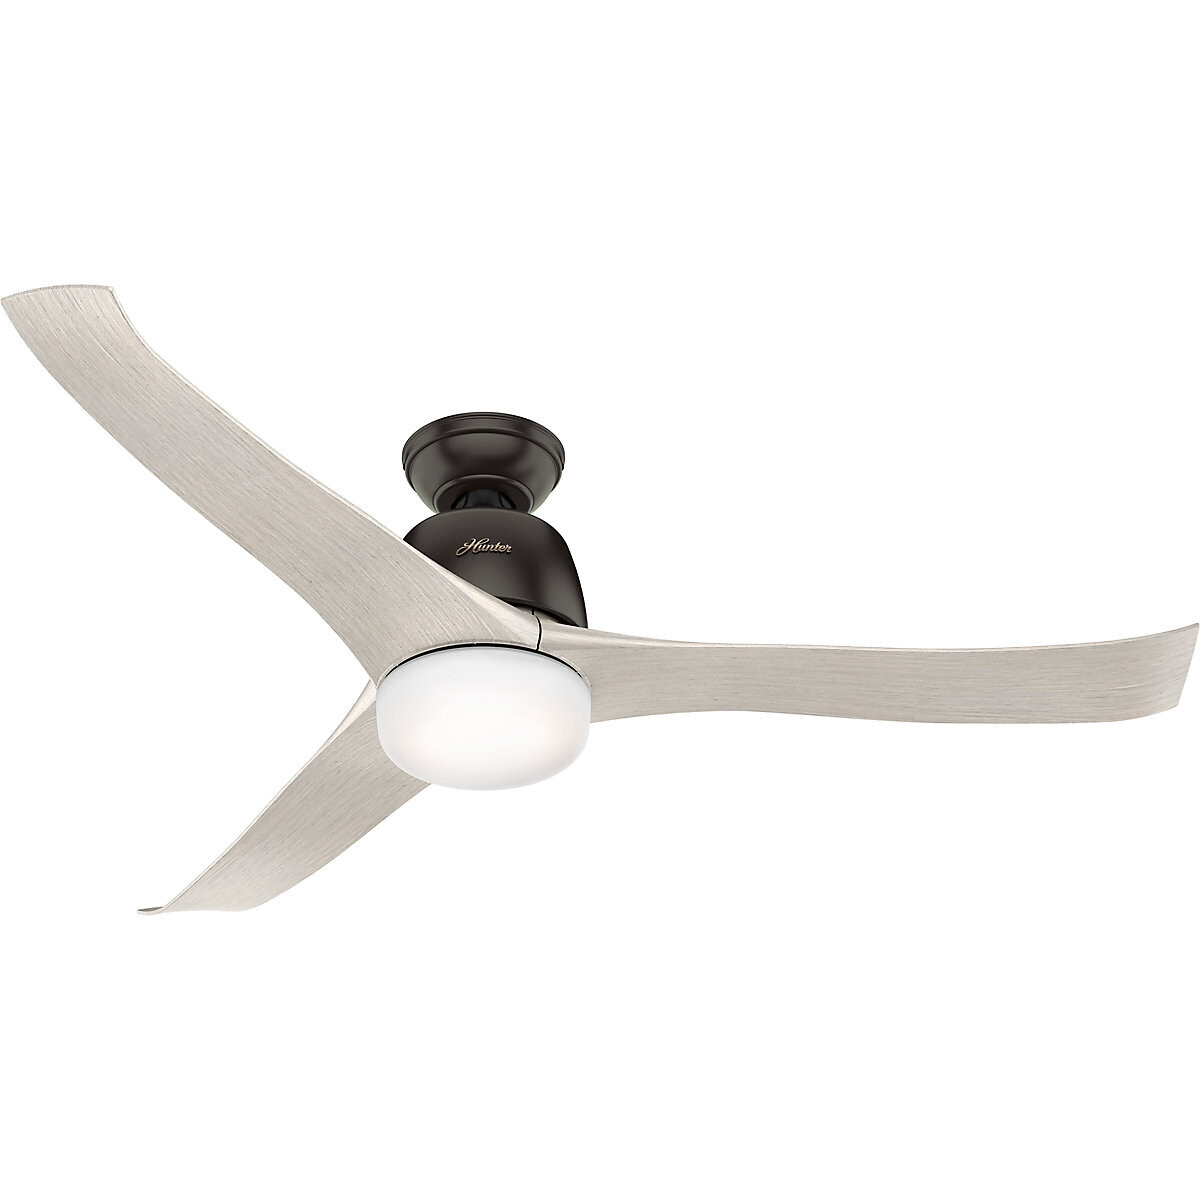 HUNTER HARMONY ceiling fan Ø137 Noble Bronze light integrated and remote control included